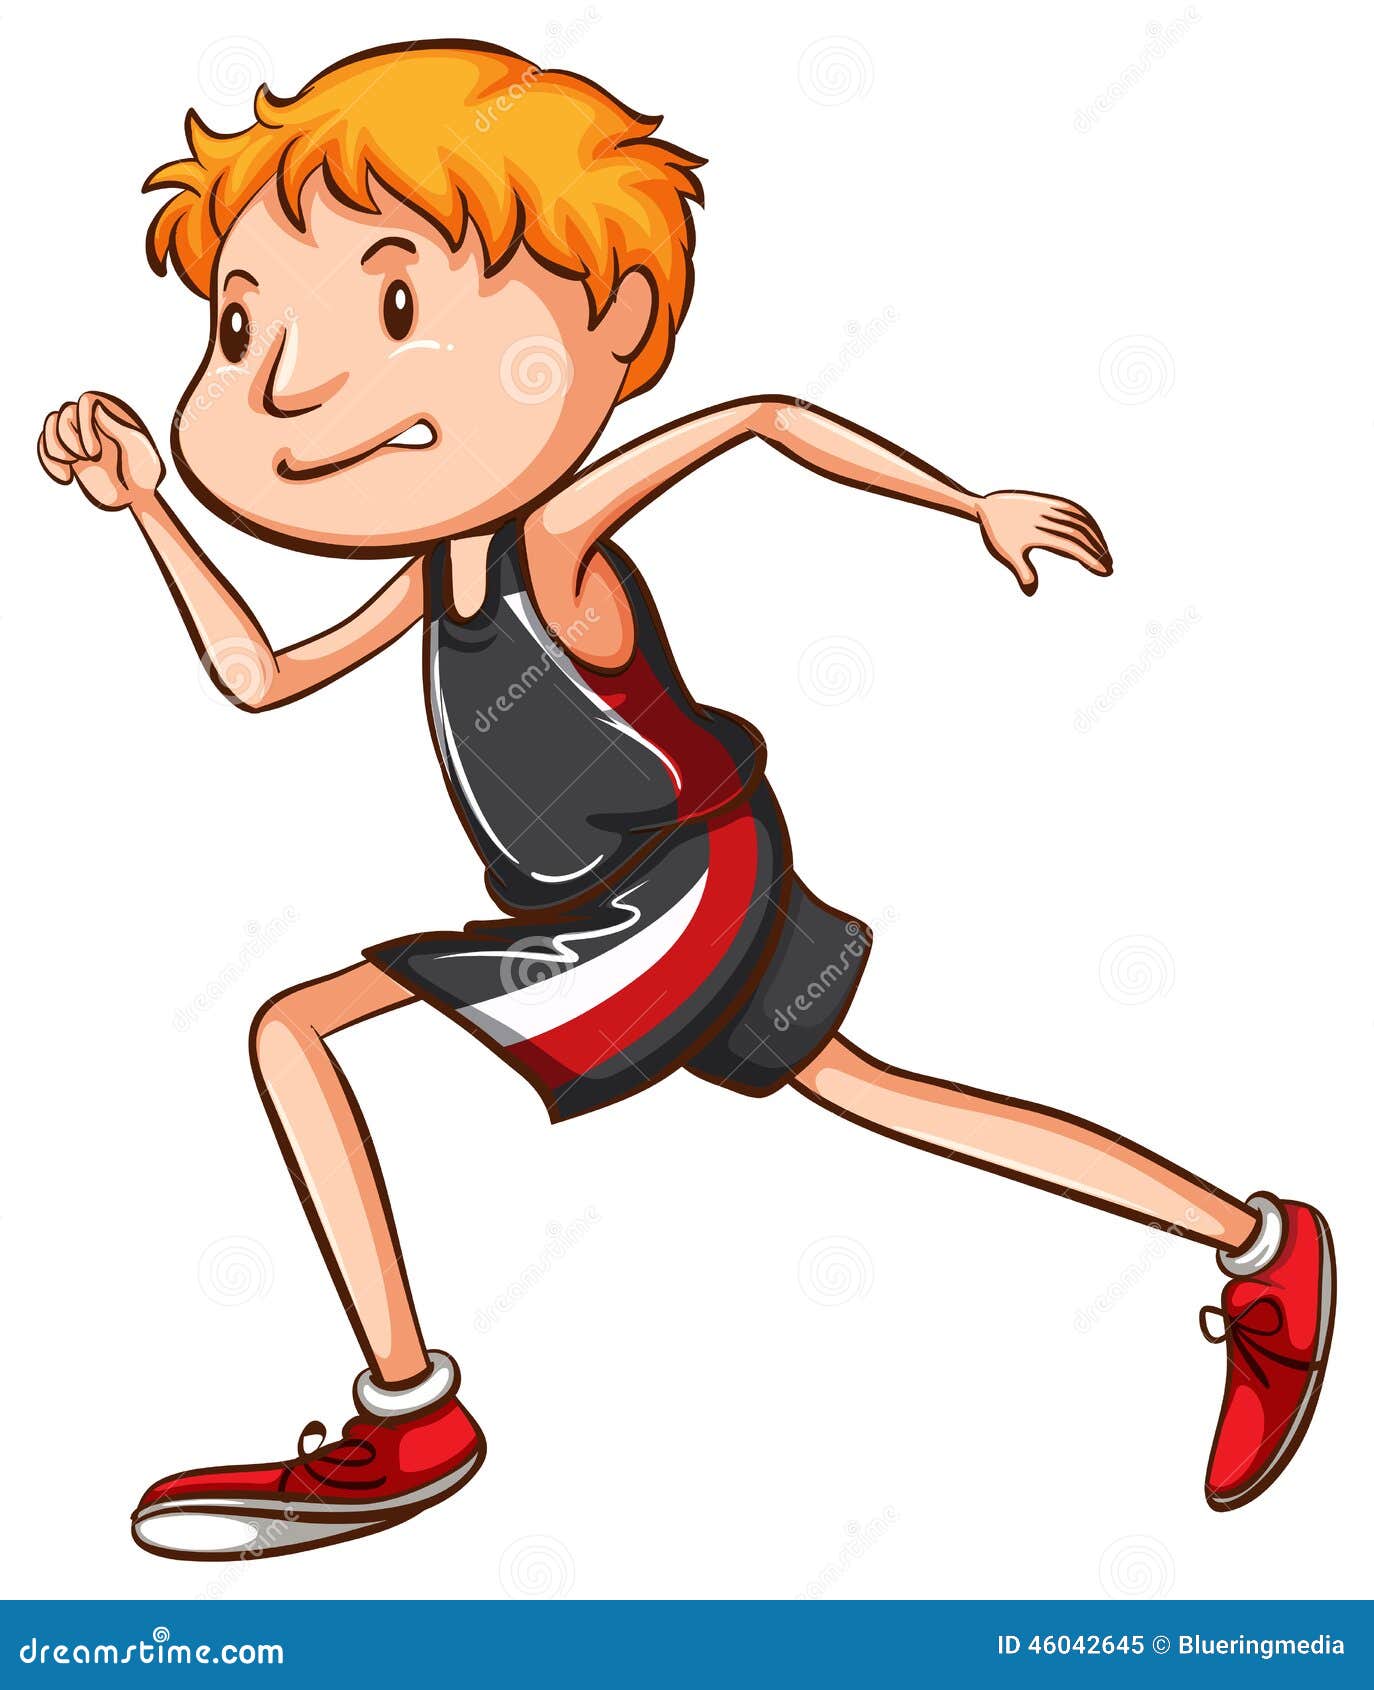 A Simple Drawing of a Boy Running Stock Vector - Illustration of runner,  contest: 46042645